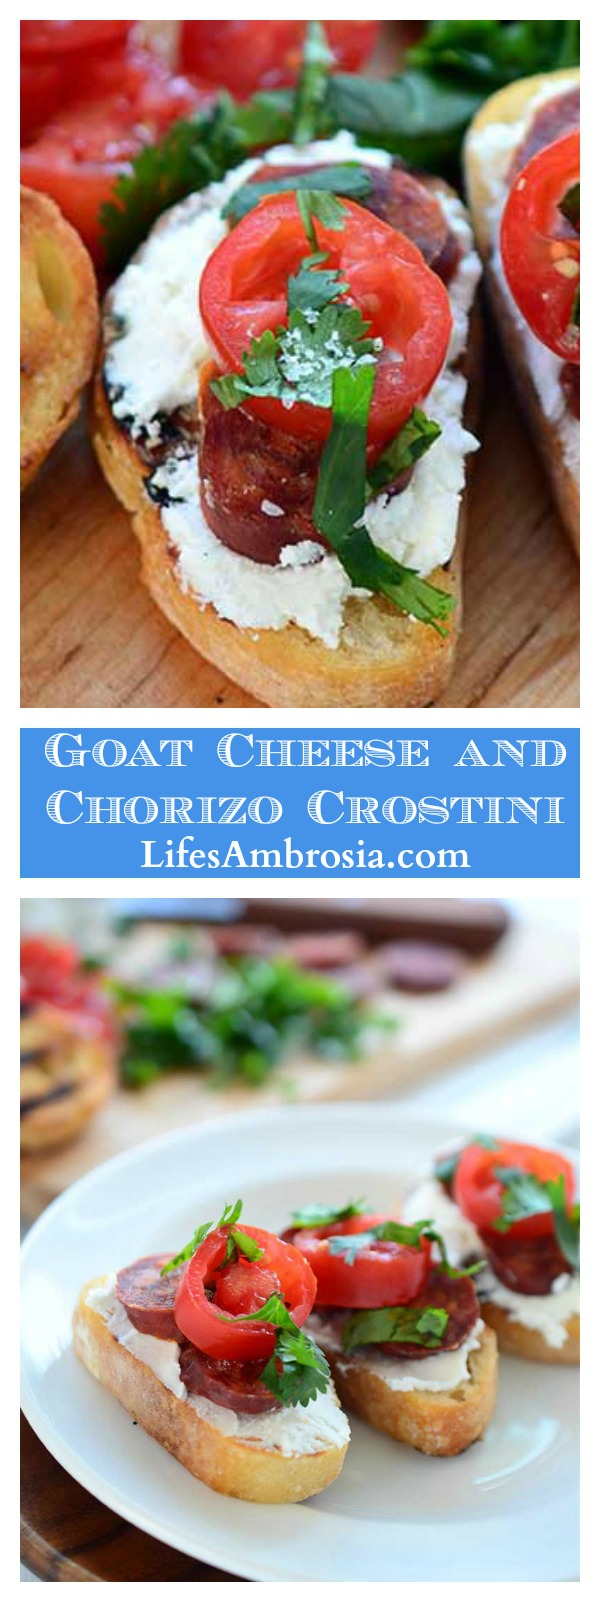 If you are looking for the perfect quick and easy appetizer for summer parties this Goat Cheese and Chorizo Crostini is it.